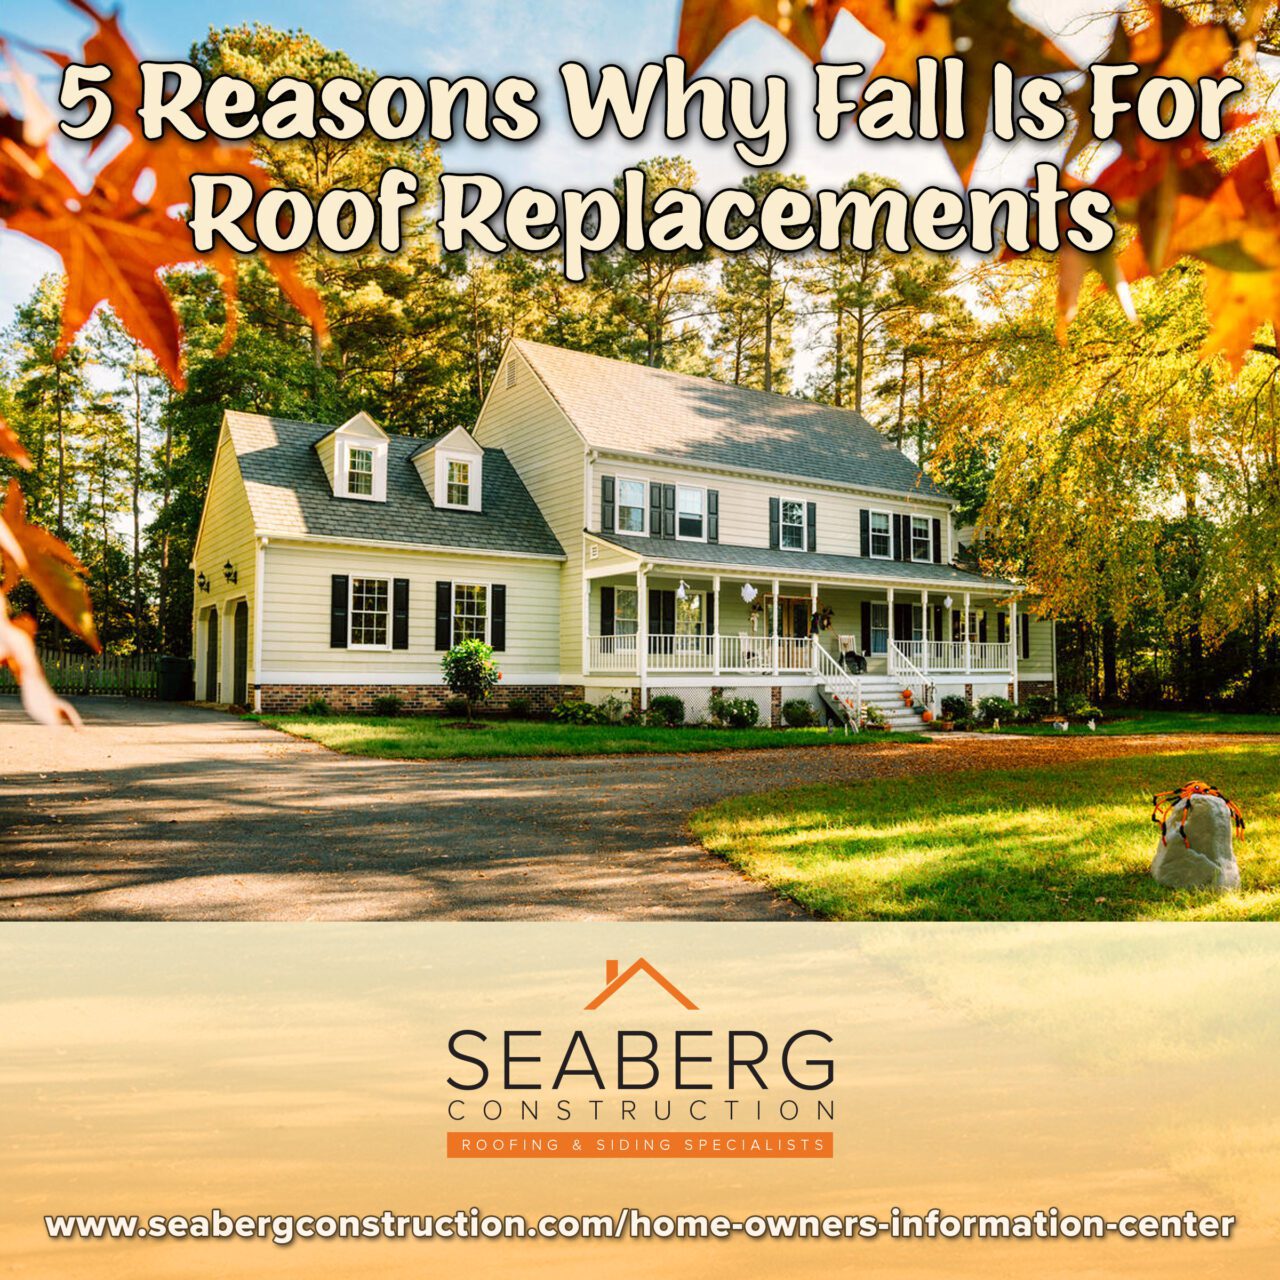 Seaberg Construction Blog: 5 Reasons Why Fall Is For Roof Replacements